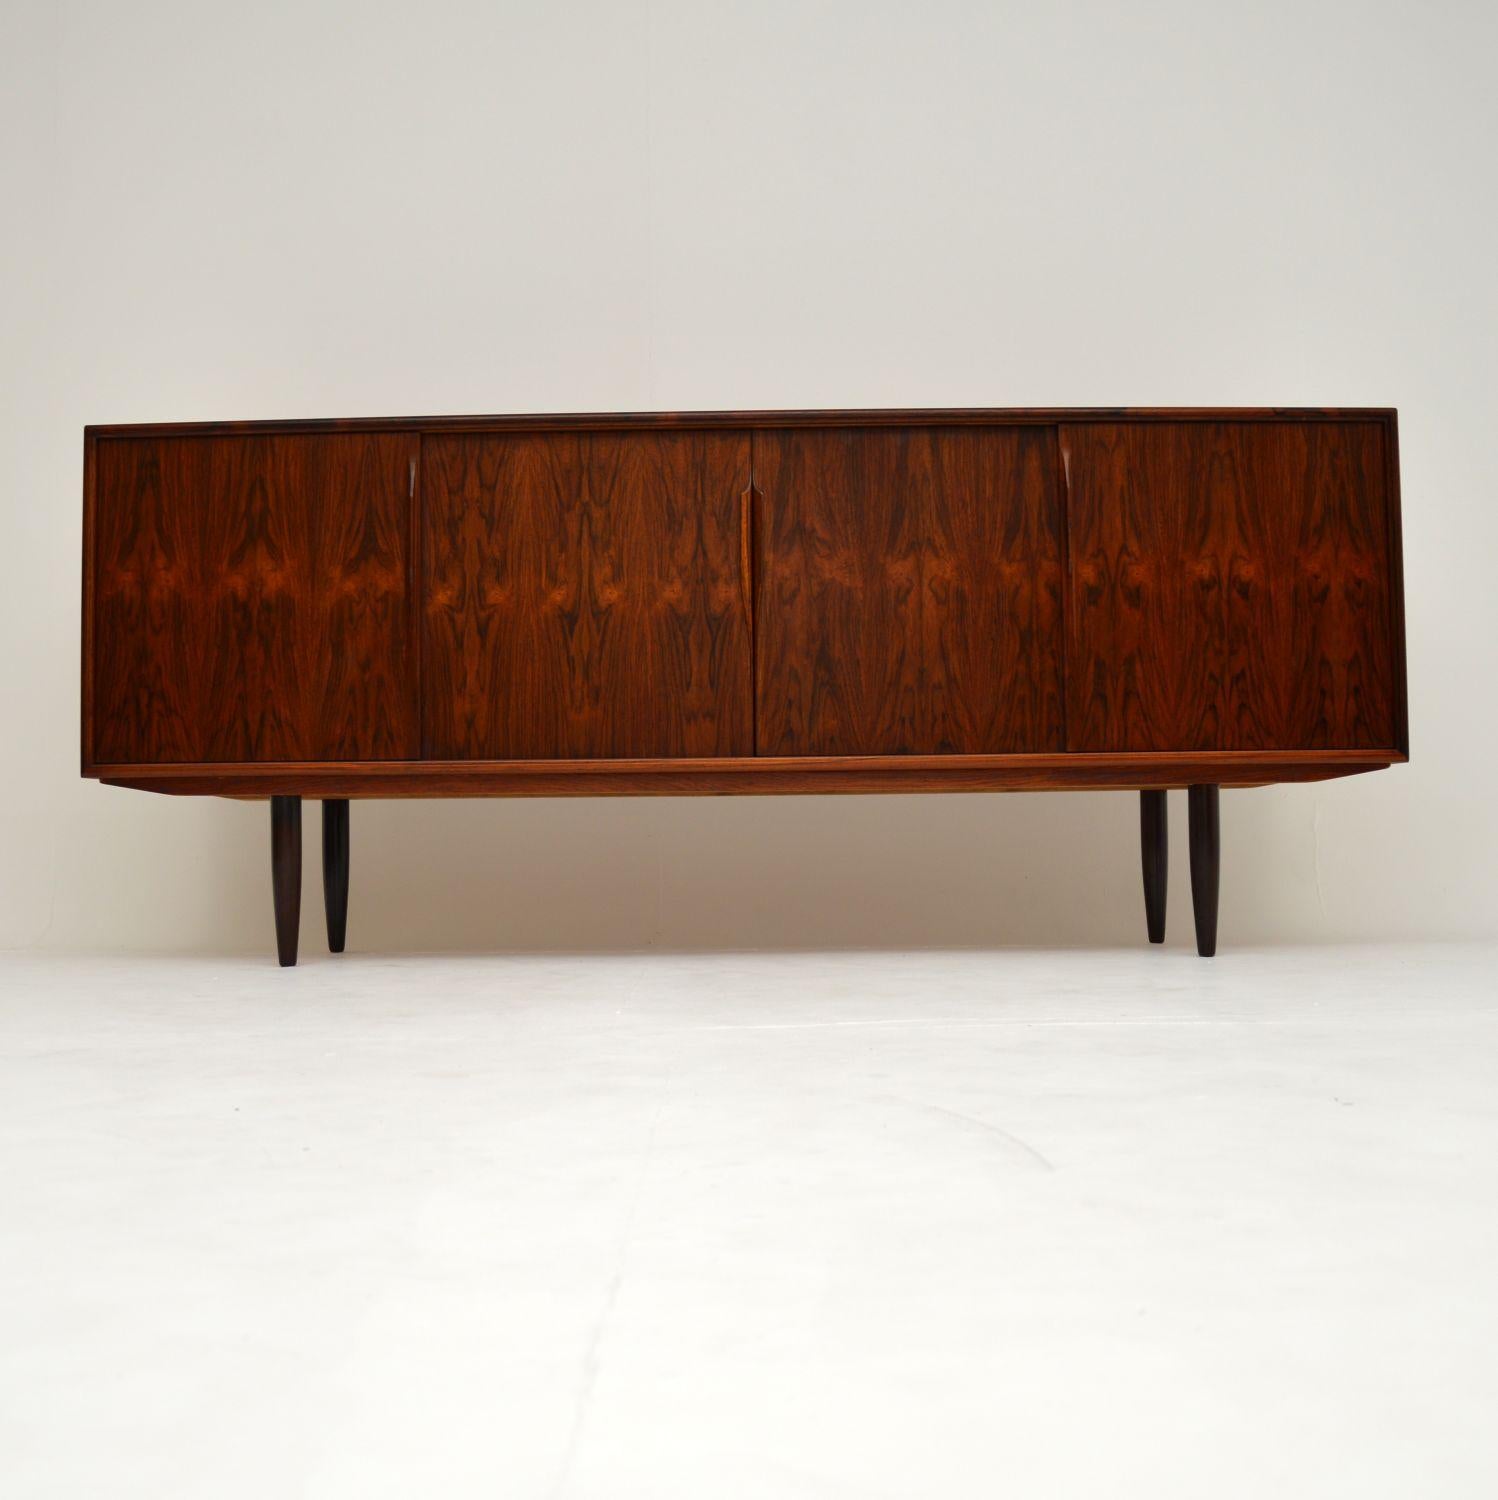 A stylish and extremely well made vintage Danish sideboard, this was designed by Gunni Omann for Axel Christensen. It was made in Denmark during the 1960’s, and is in superb condition for its age.

We have just had this re-polished, the colour and